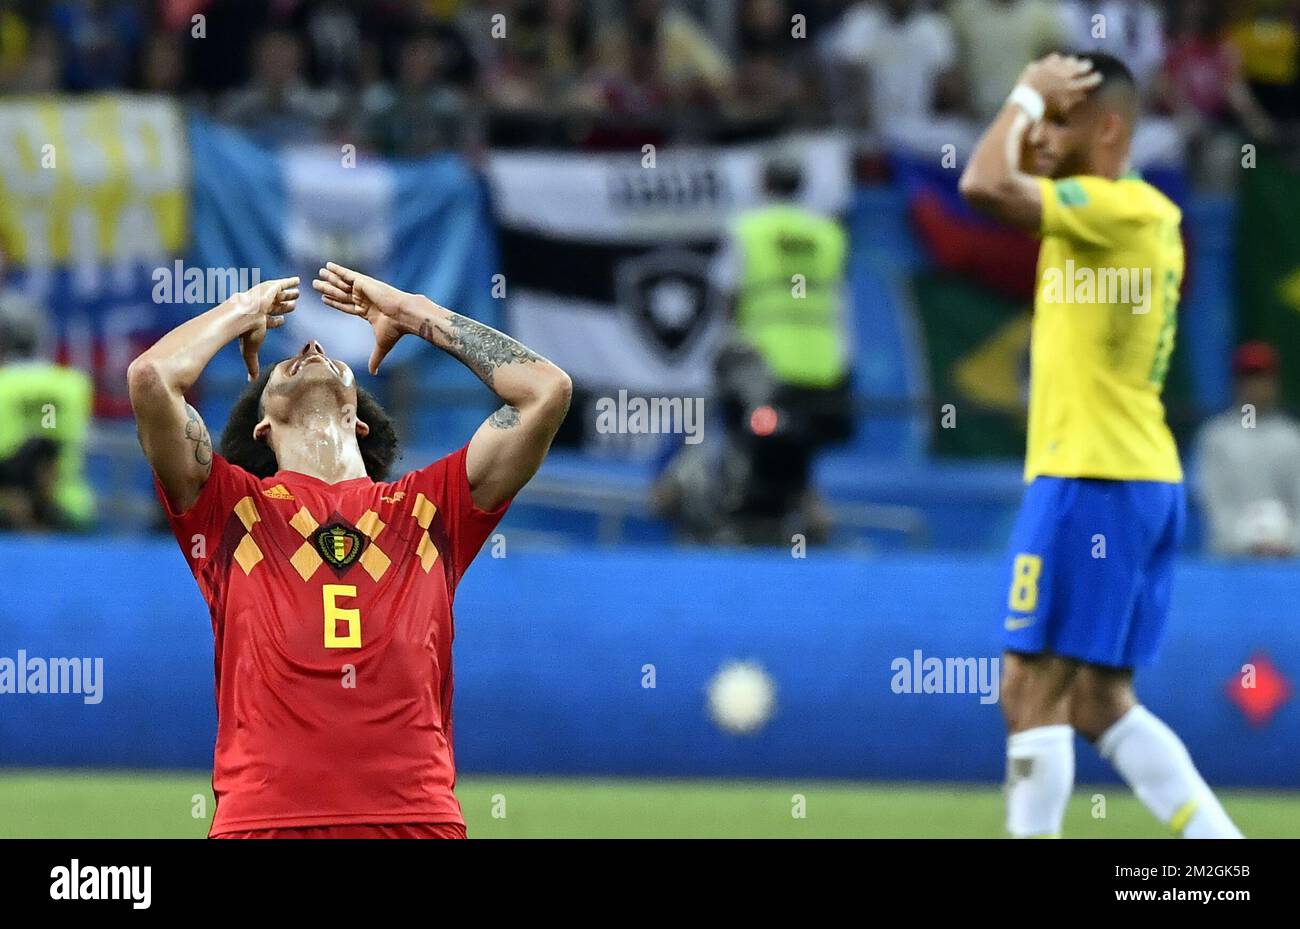 Belgium's Axel Witsel celebrates after winning a soccer game between Belgian national soccer team the Red Devils and Brazil in Kazan, Russia, Friday 06 July 2018, the quarter-finals of the 2018 FIFA World Cup. BELGA PHOTO DIRK WAEM  Stock Photo